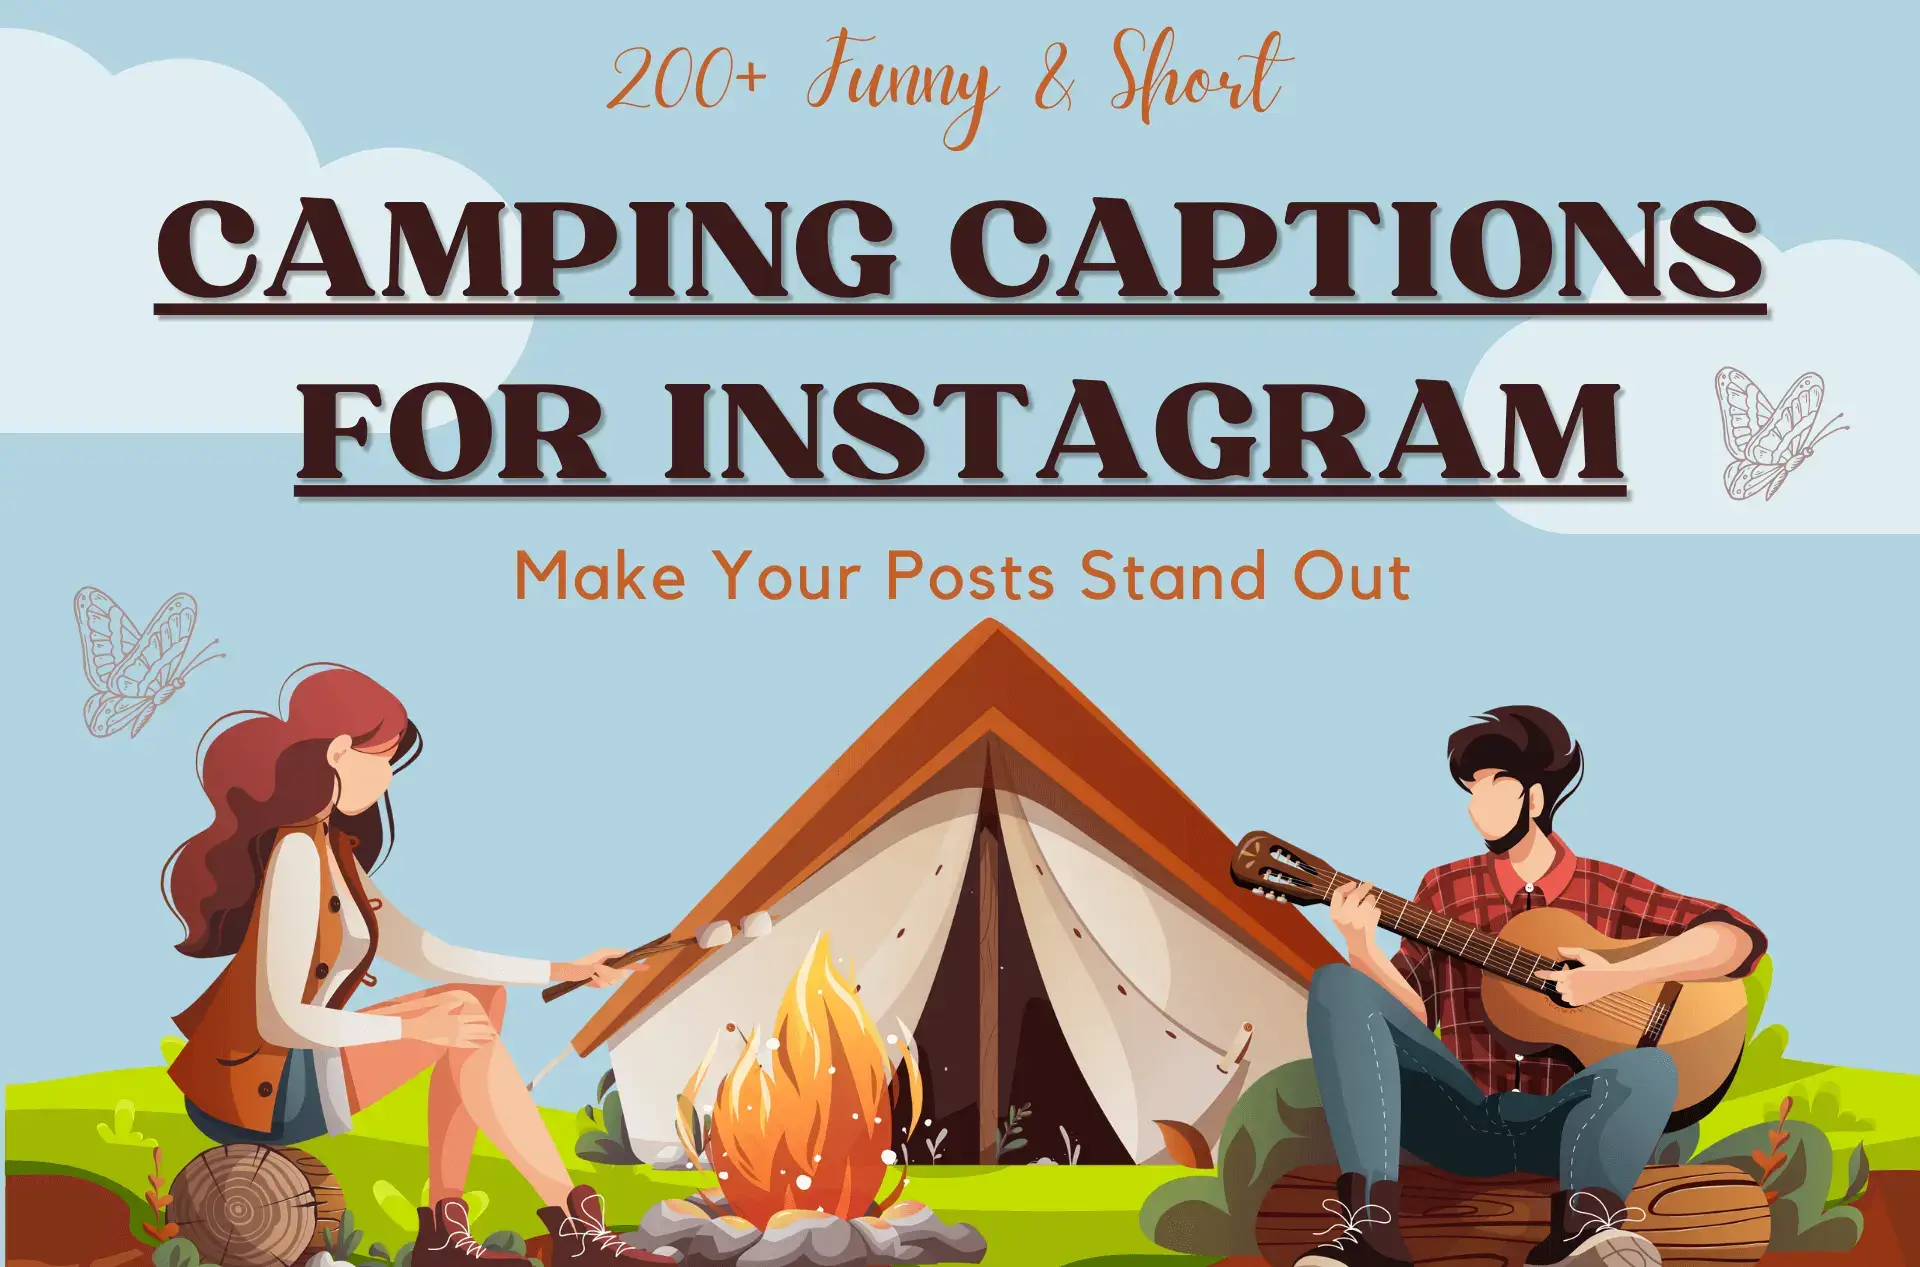 A cartoon picture of girl and boy enjoying the camping scene - Having Camping Captions for Instagram